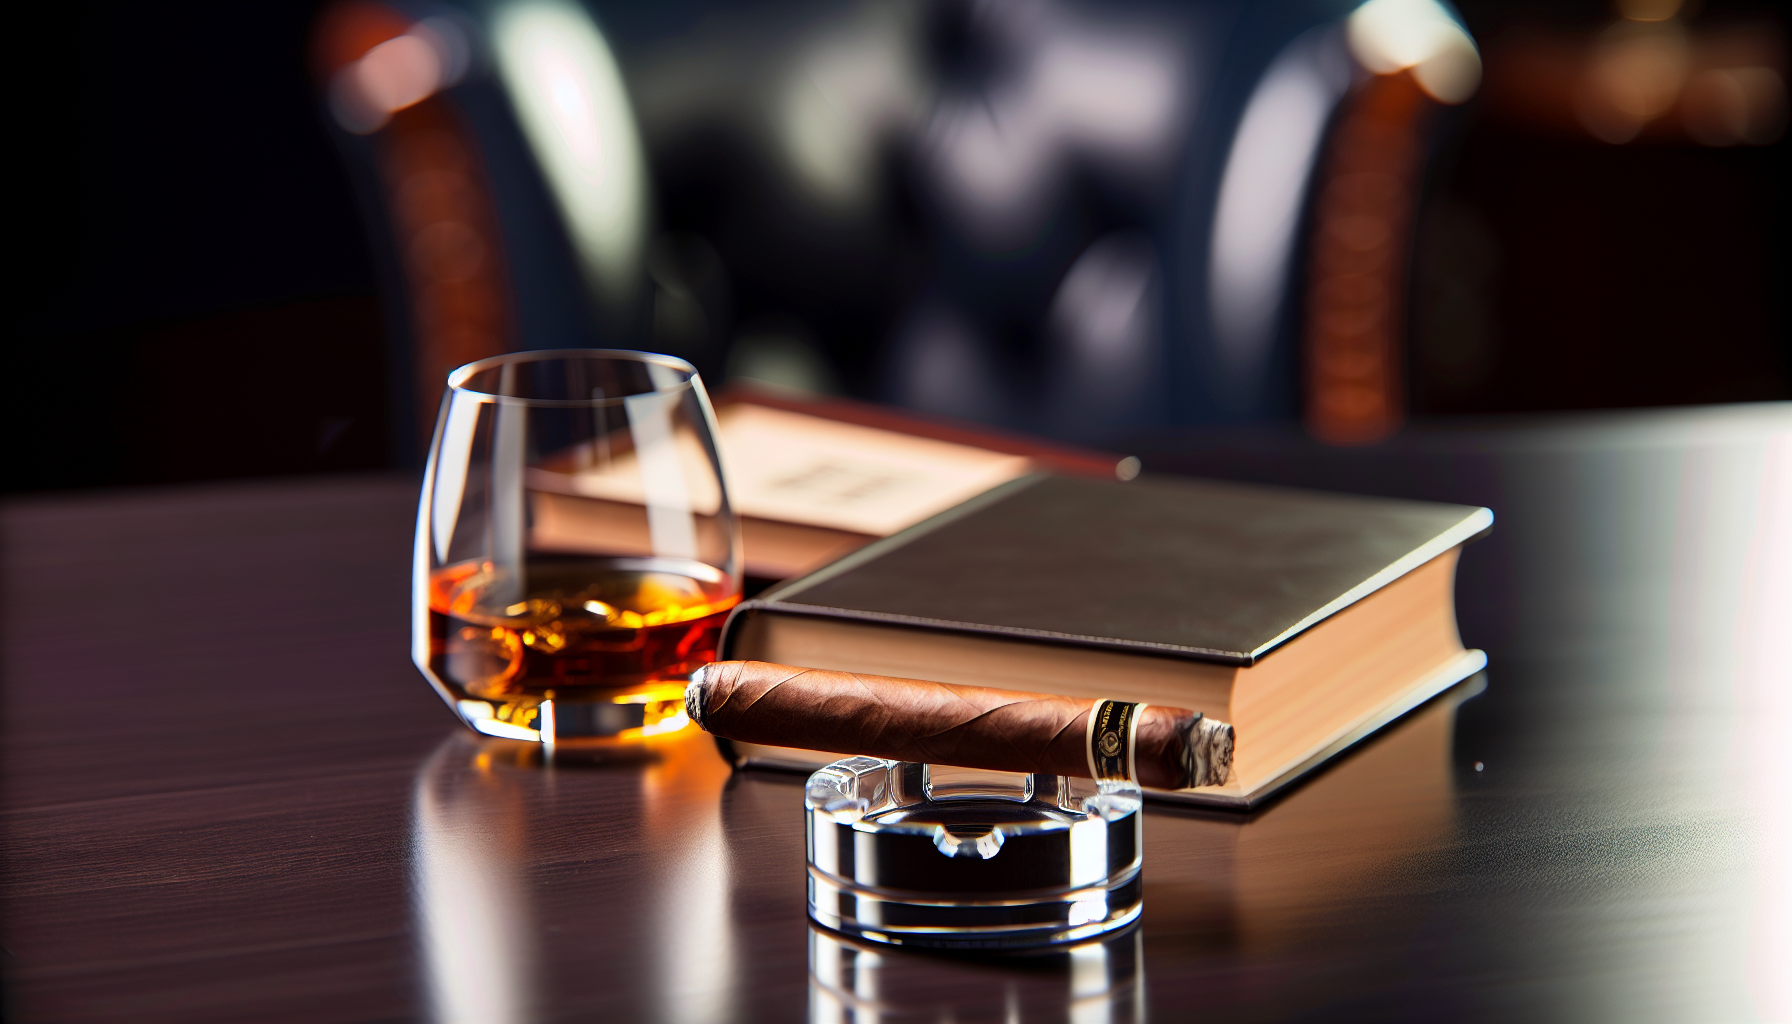 Find the perfect single cigar for every occasion, from celebratory smokes to everyday indulgences and bourbon pairings